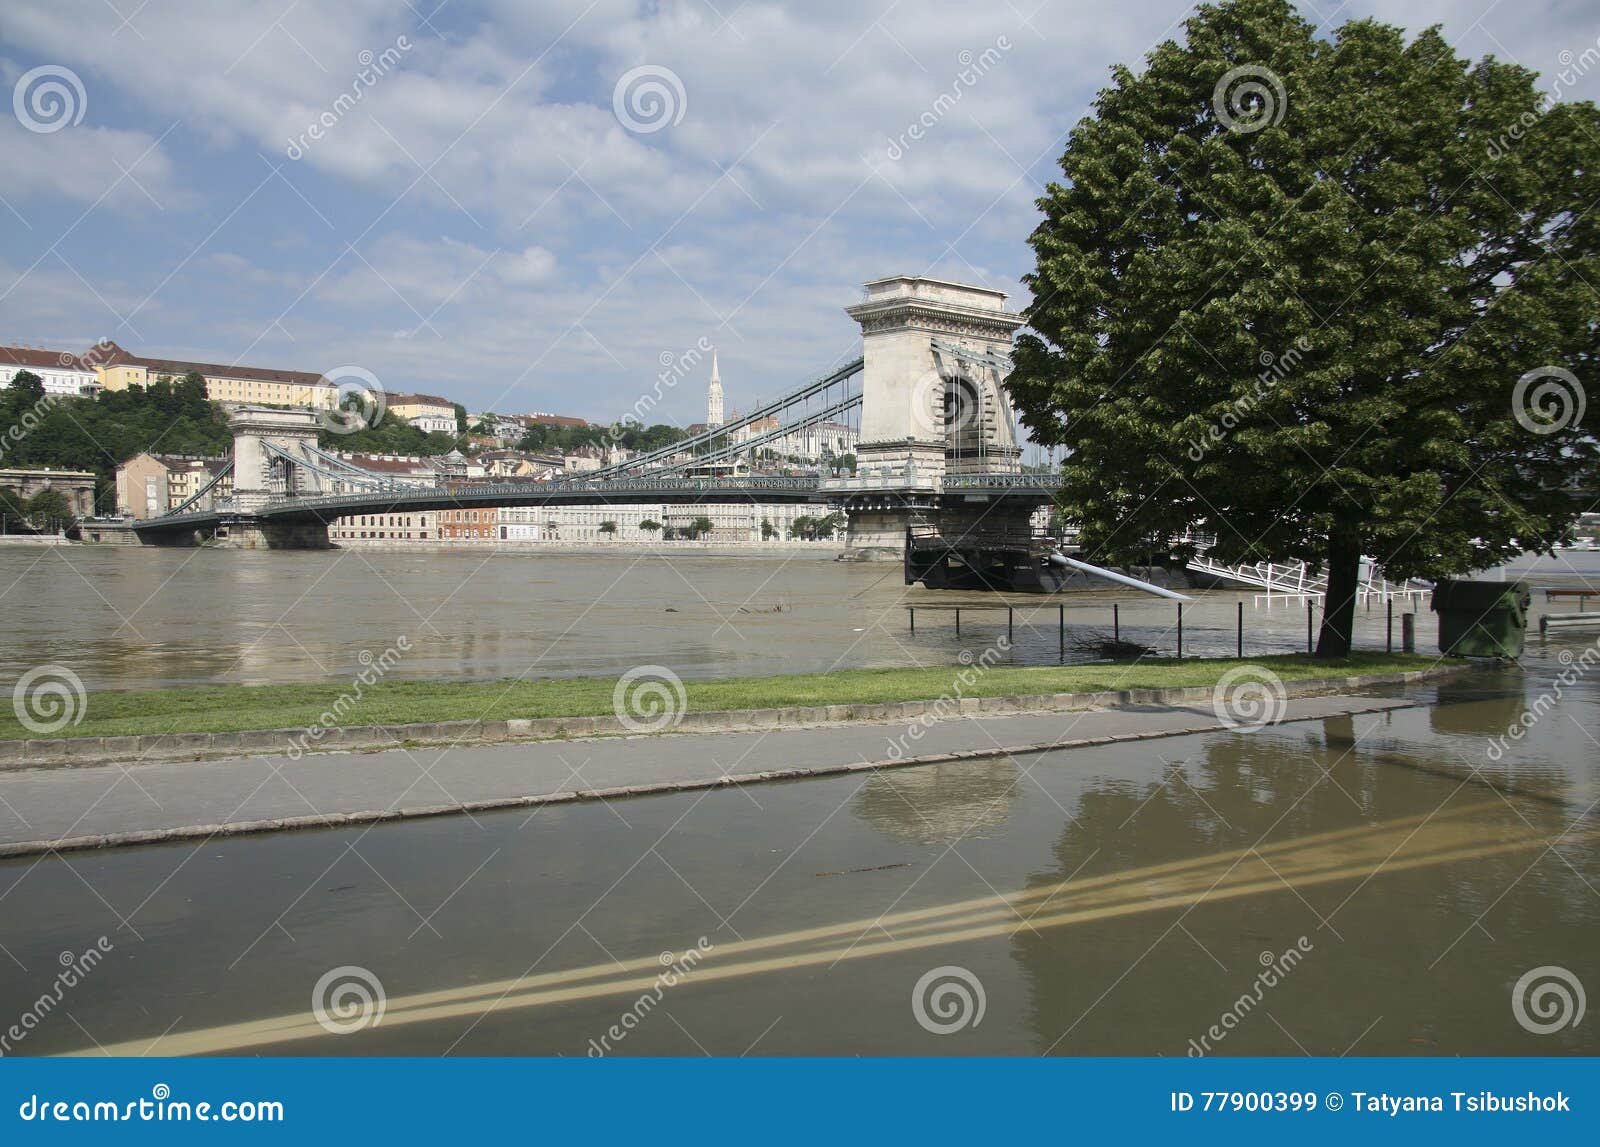 the flooding of the danube in budapest